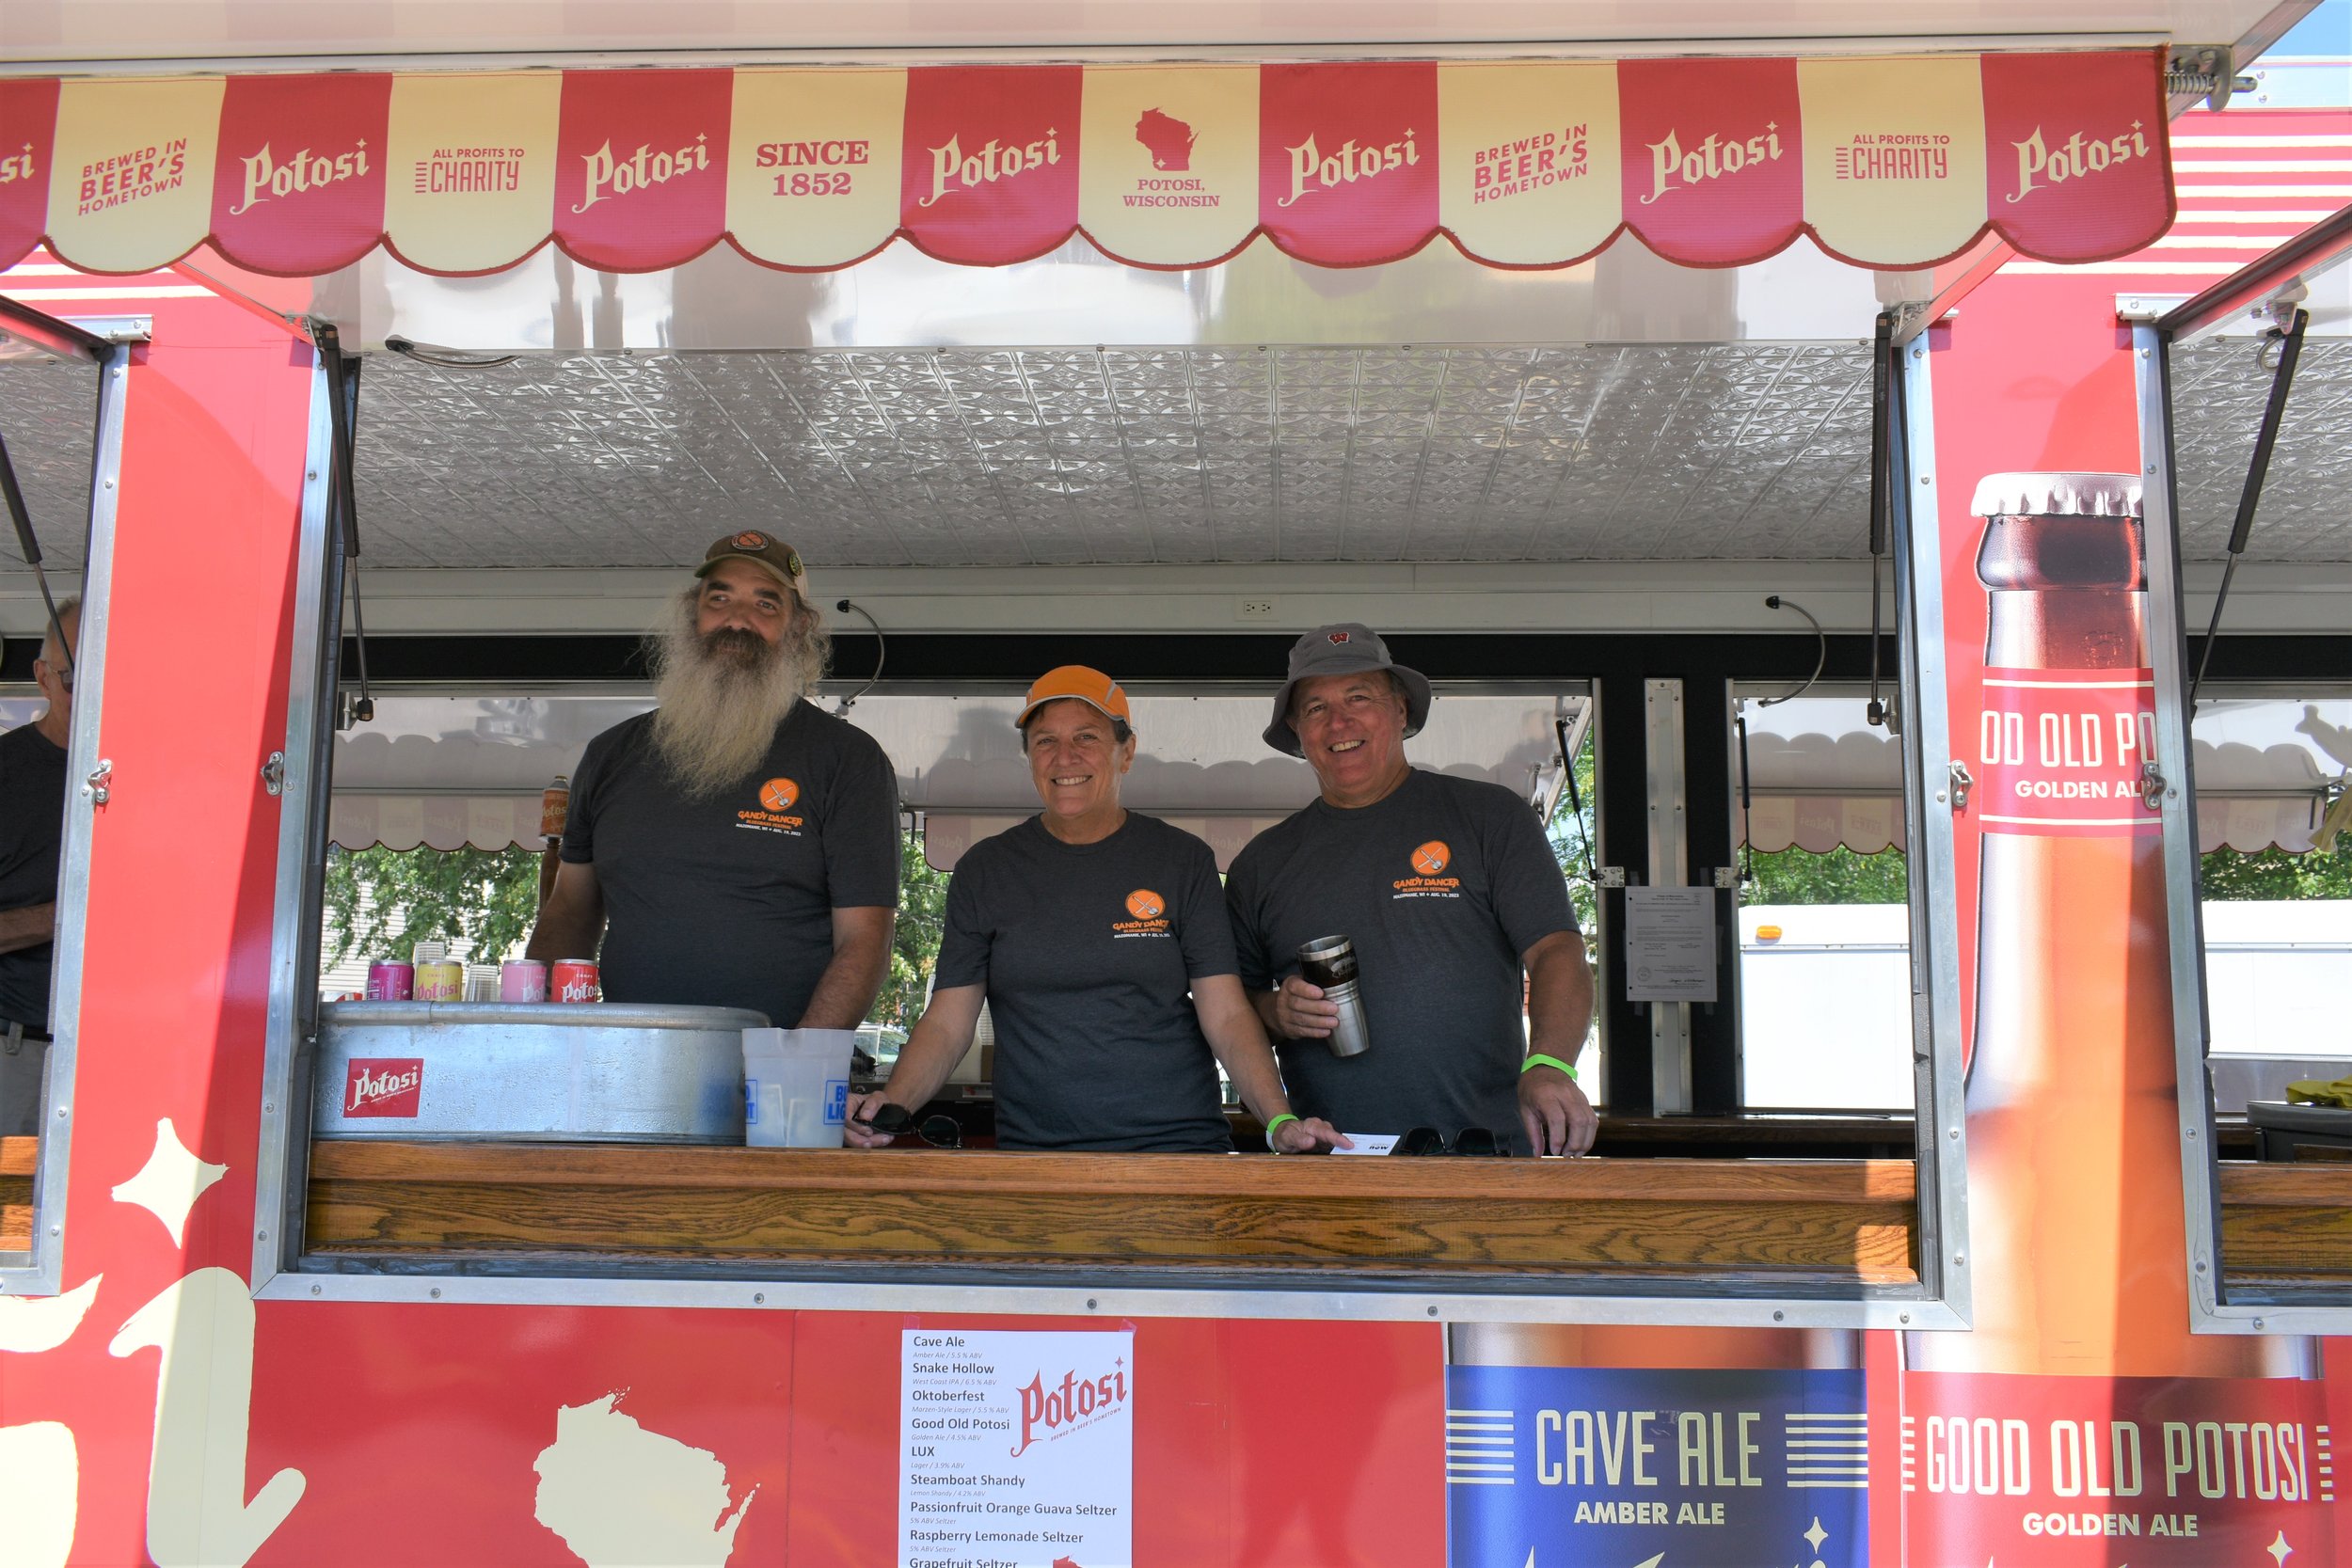  L to R: Joe, Deb, and Jim working the Potosi Beer stand. 